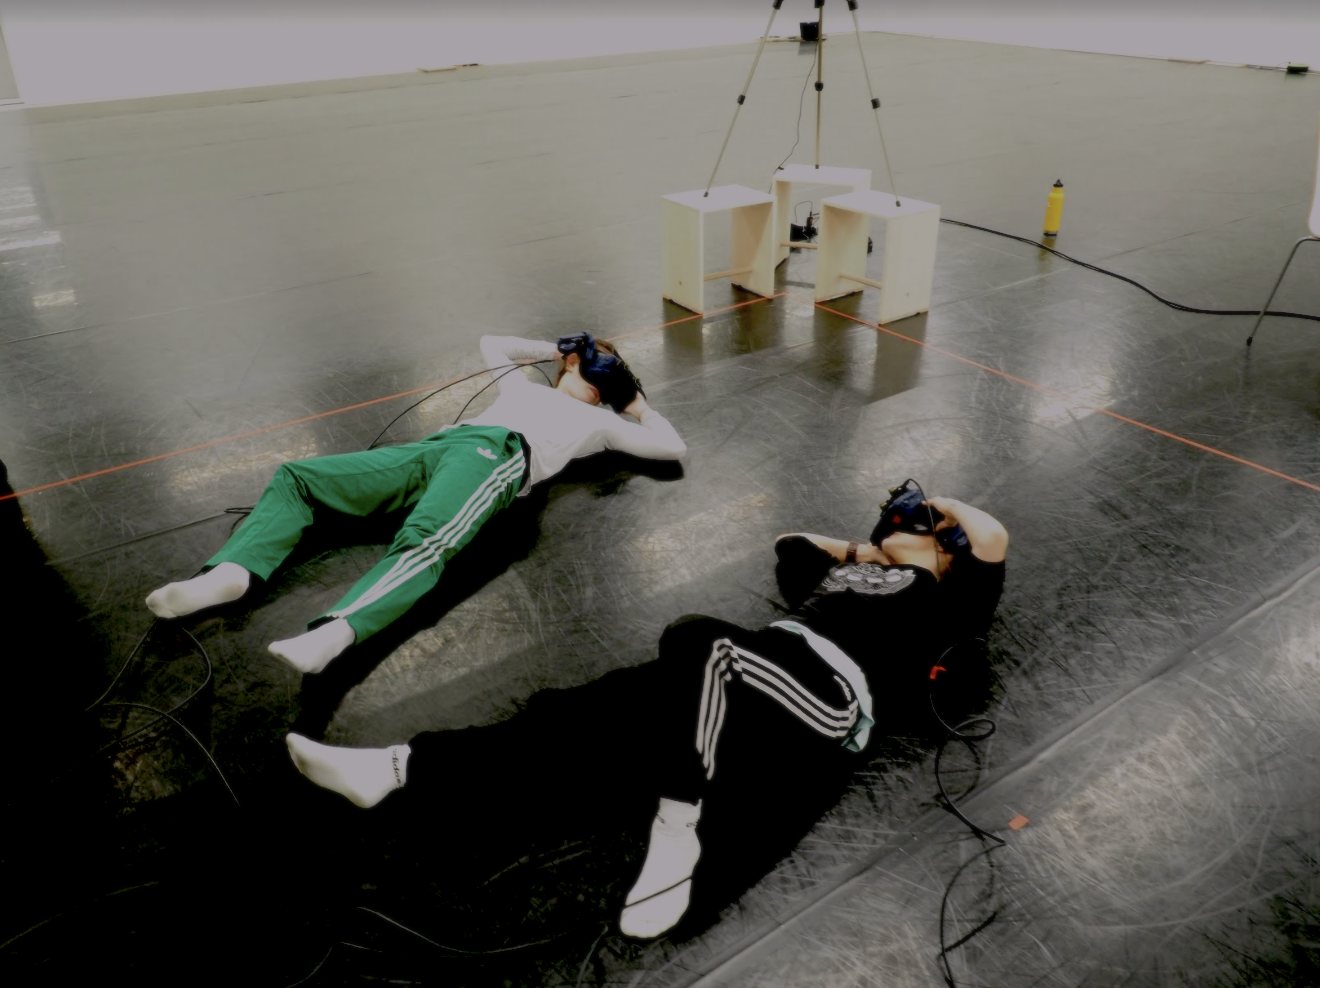 A couple of people laying on the ground with VR headsets on.